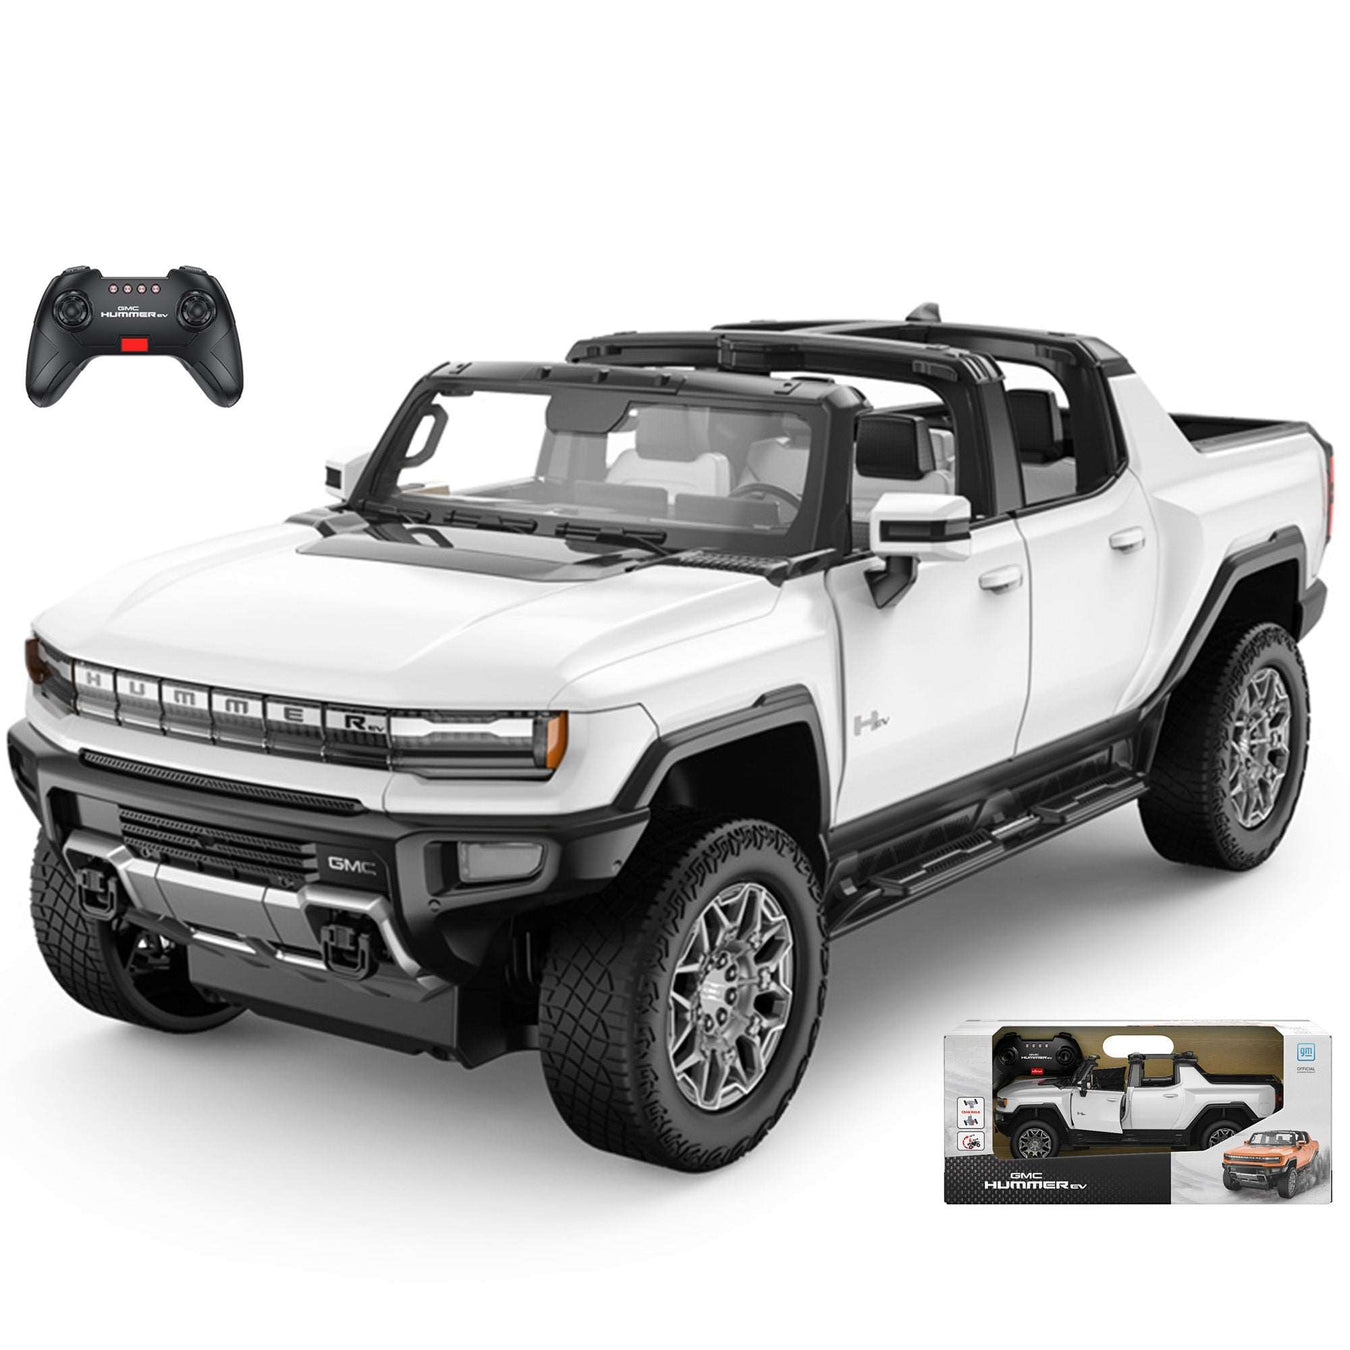 GMC Hummer EV RC Car 1/16 Scale Licensed Remote Control Toy Car with Open Doors, Working Lights, Phone Holder and Crab Walking Mode by Rastar